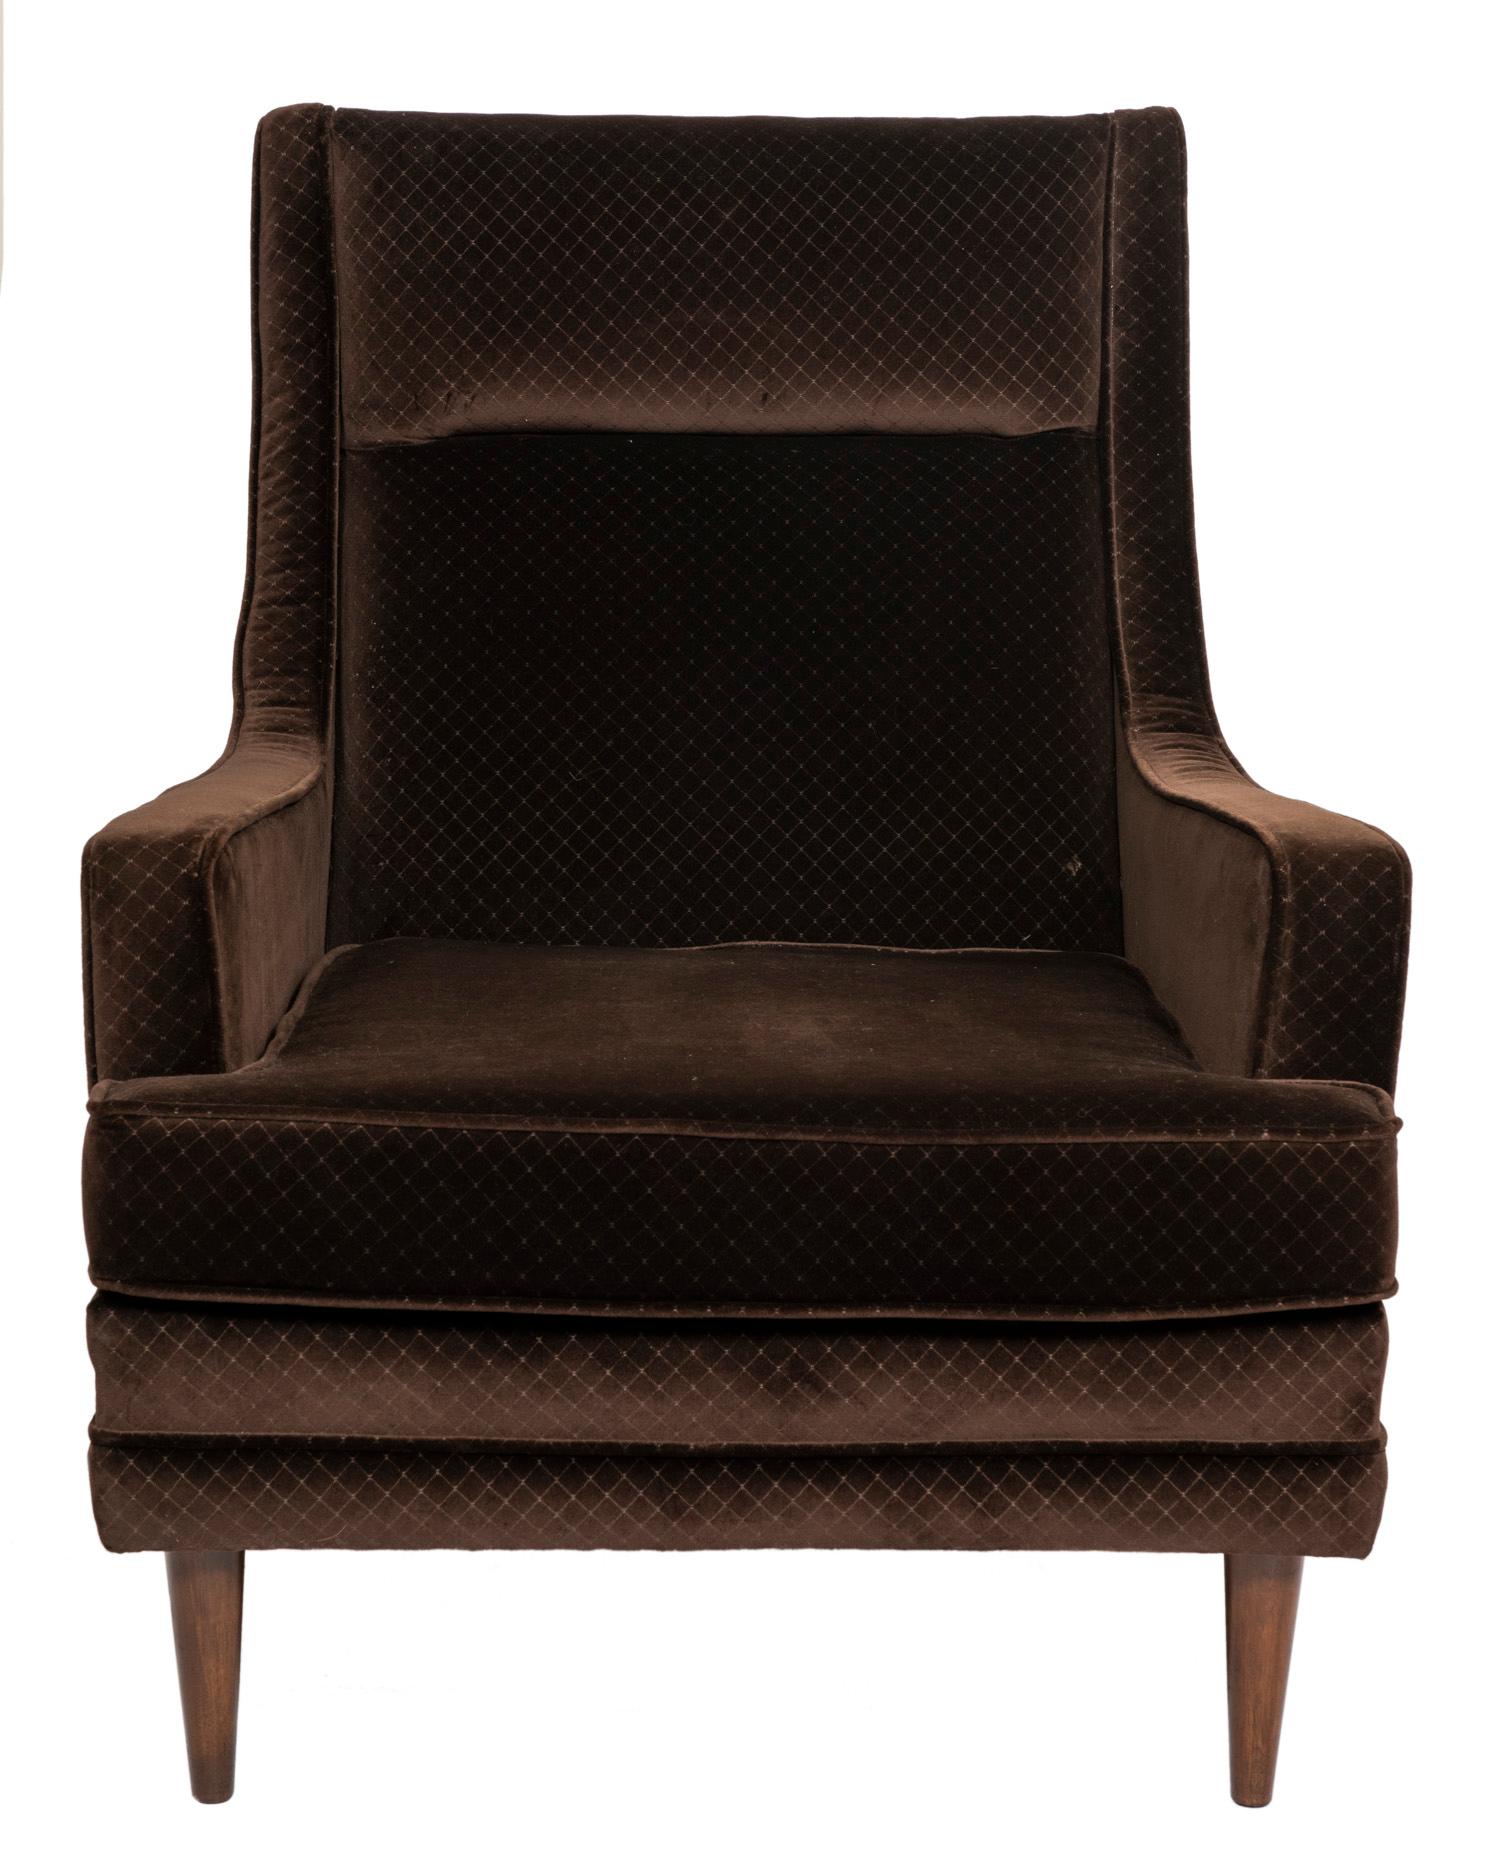 This large and stylish 1950s lounge chair and ottoman is in a plush chocolate brown velvet upholstery with a subtle 